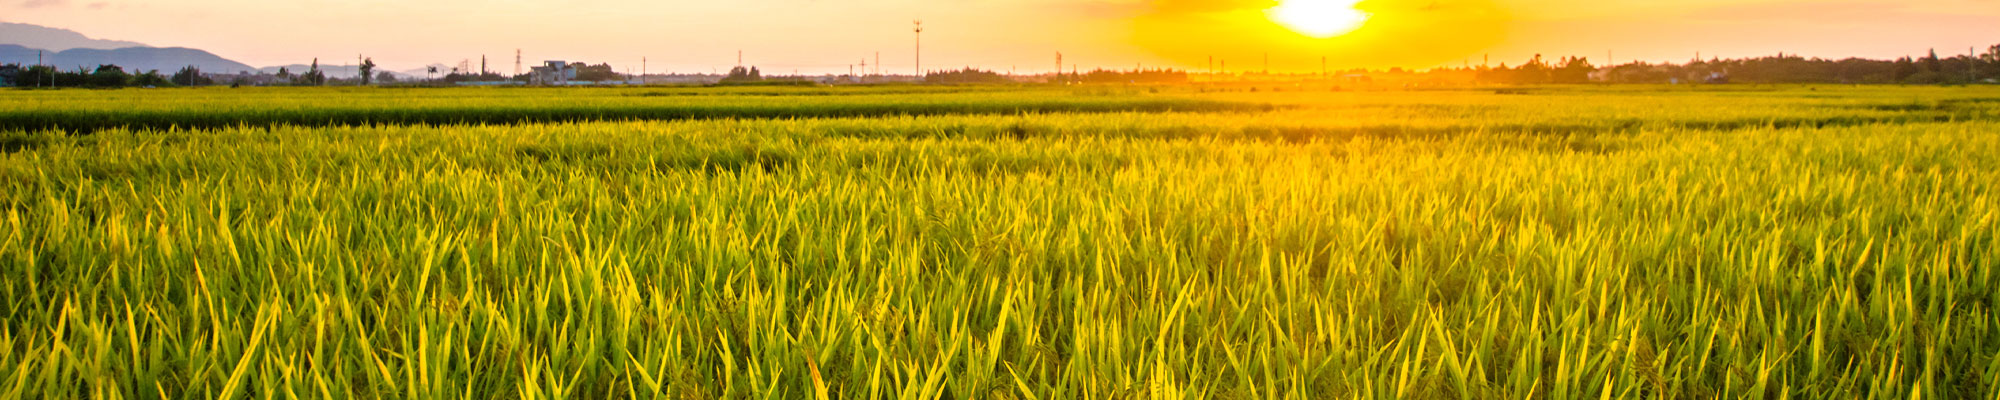 Ground level image of a rice field at sunset.